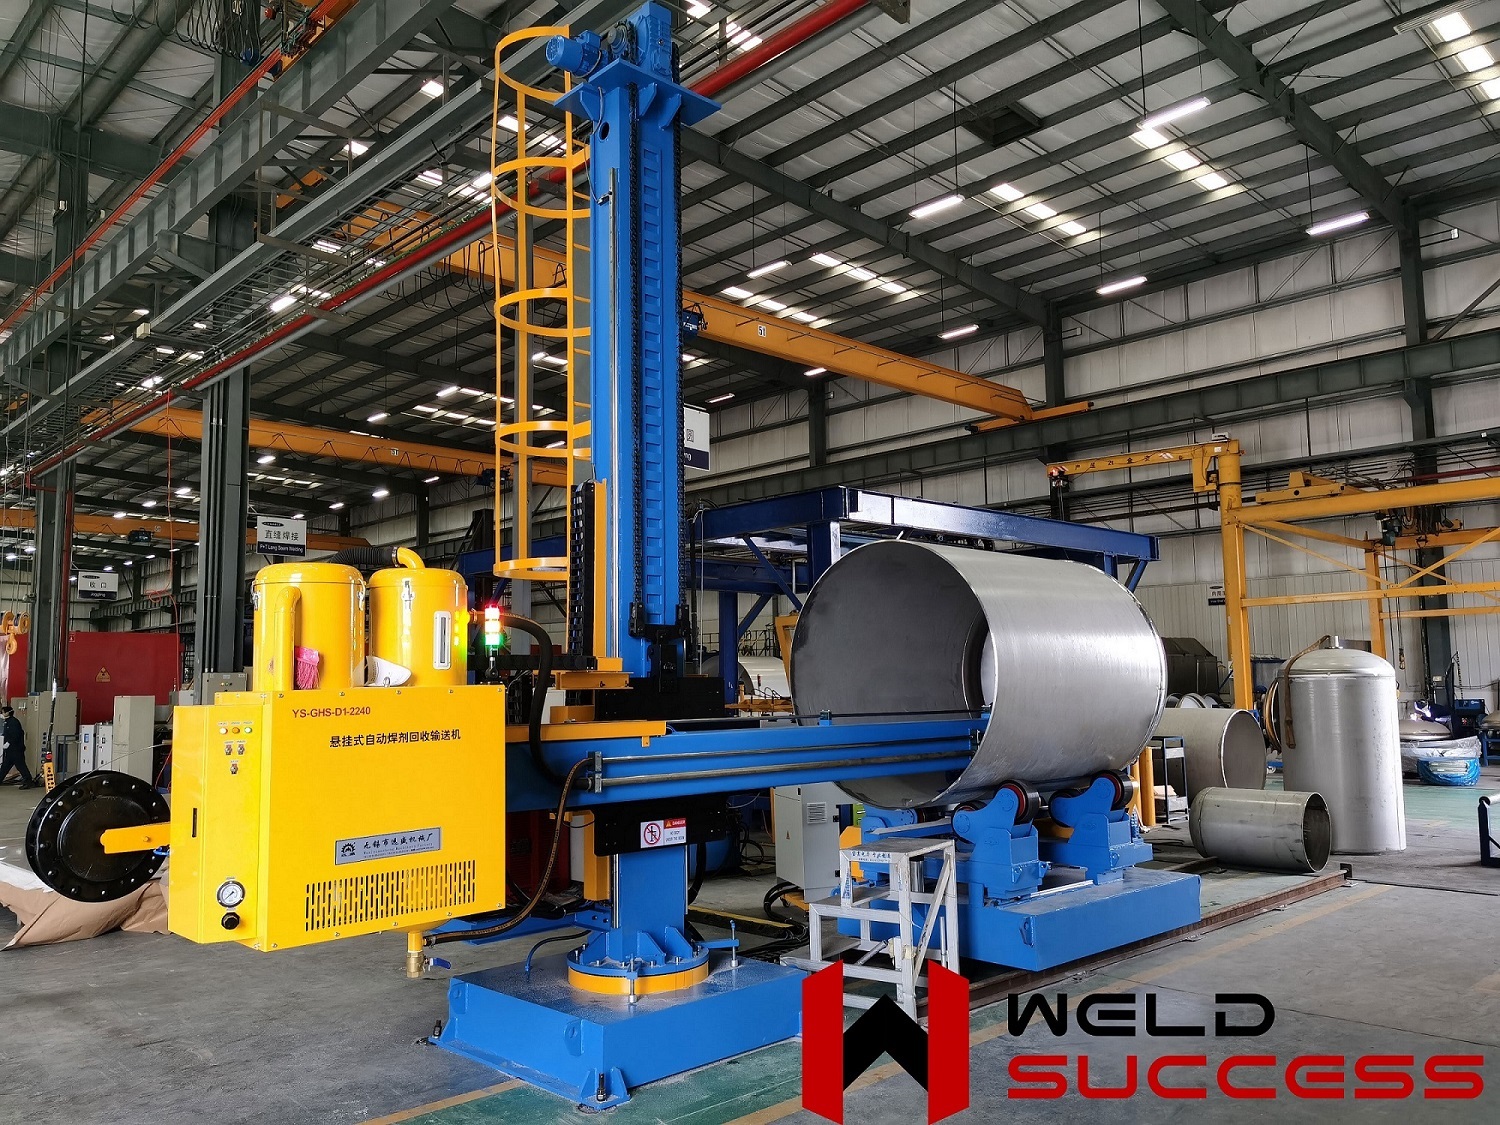 Motorized Rotation Heavy Duty Automatic Welding Machines Manipulators With Welding Rollers